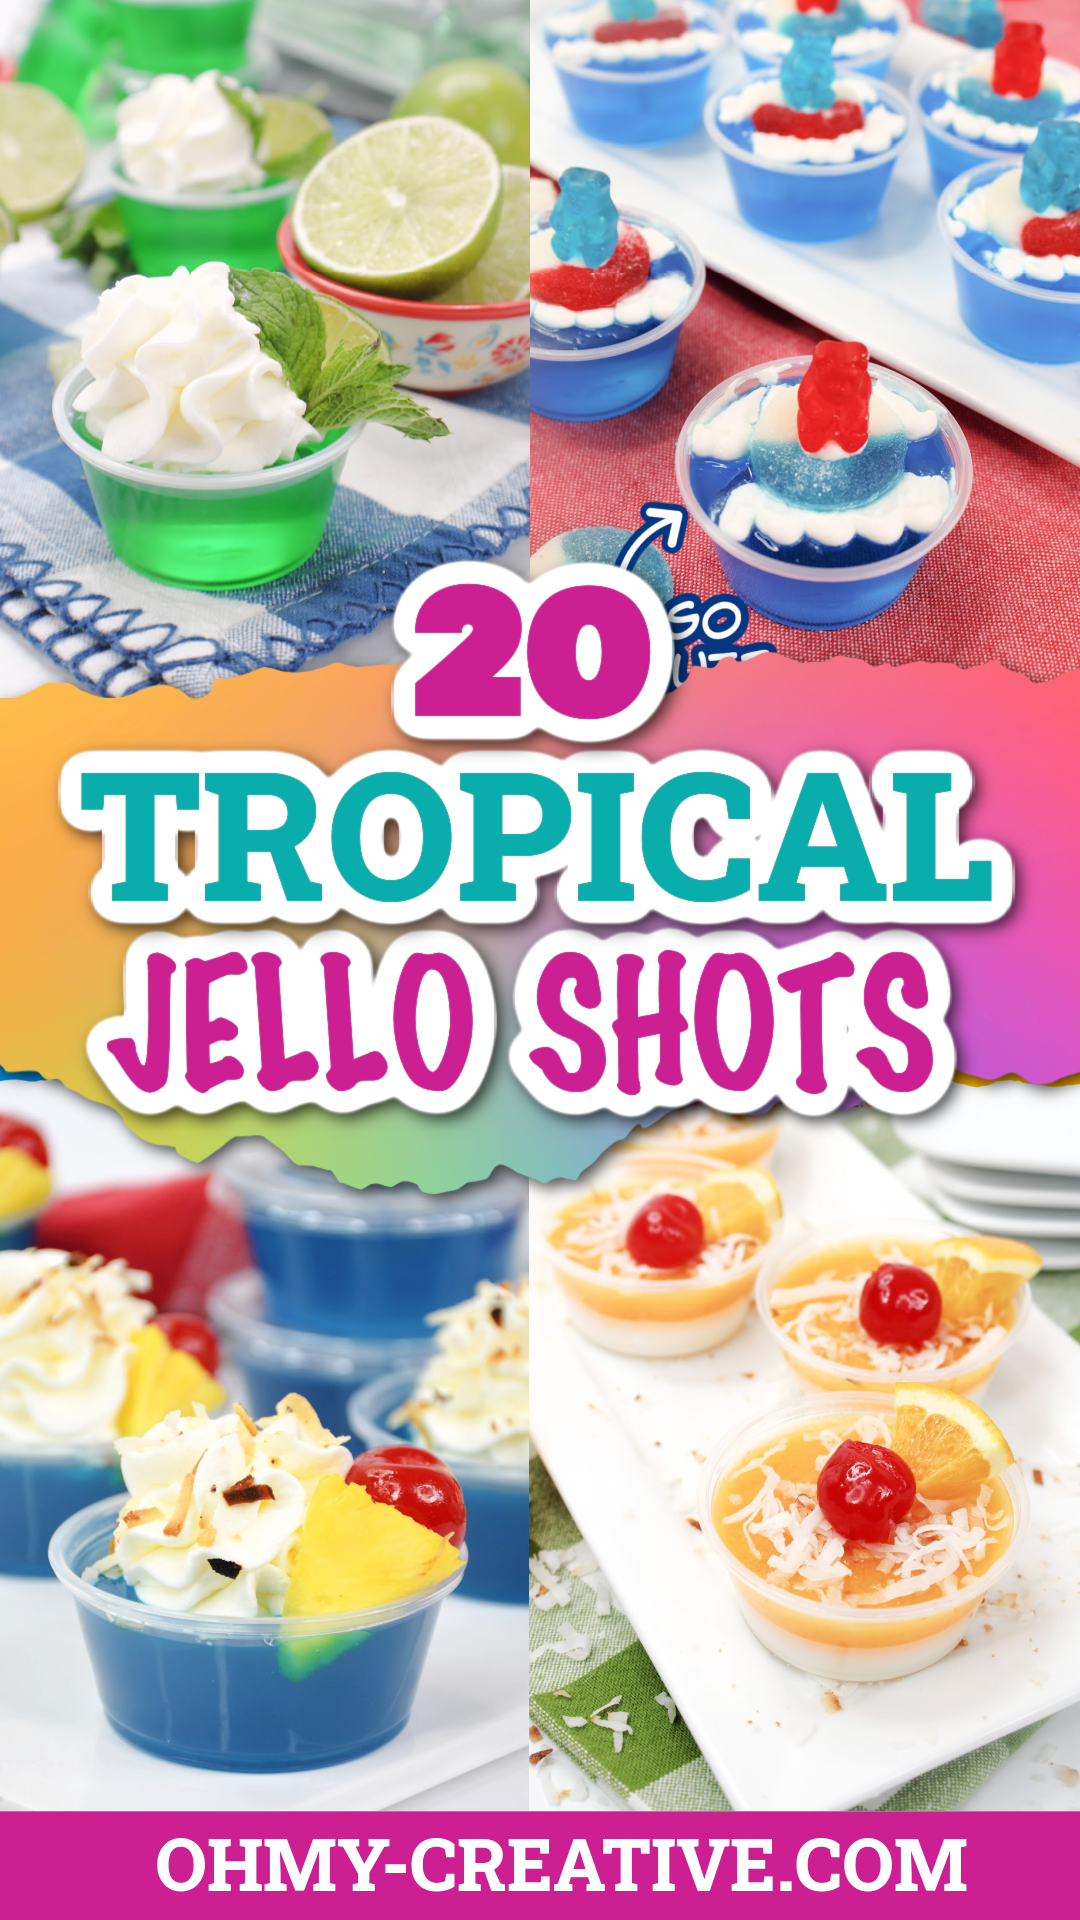 Tropical Jello Shots With Island Vibes